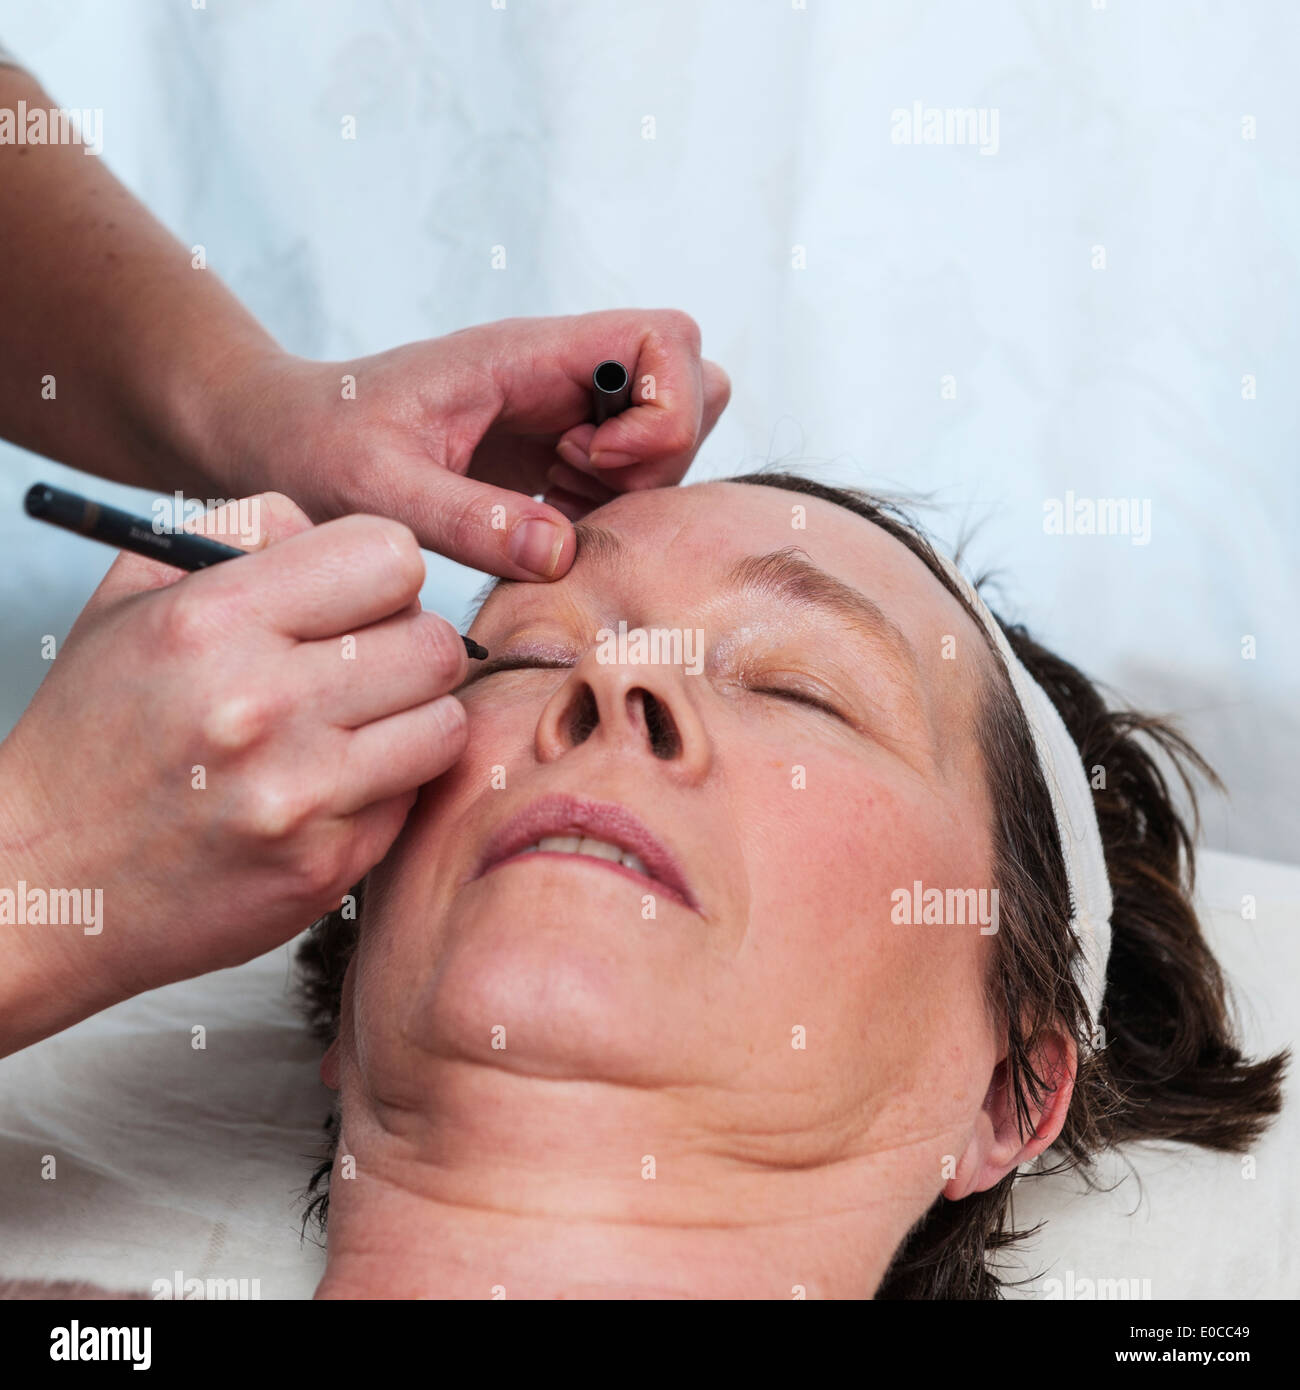 A woman in her early sixties having a facial and make up beauty treatment by a beauty therapist Stock Photo